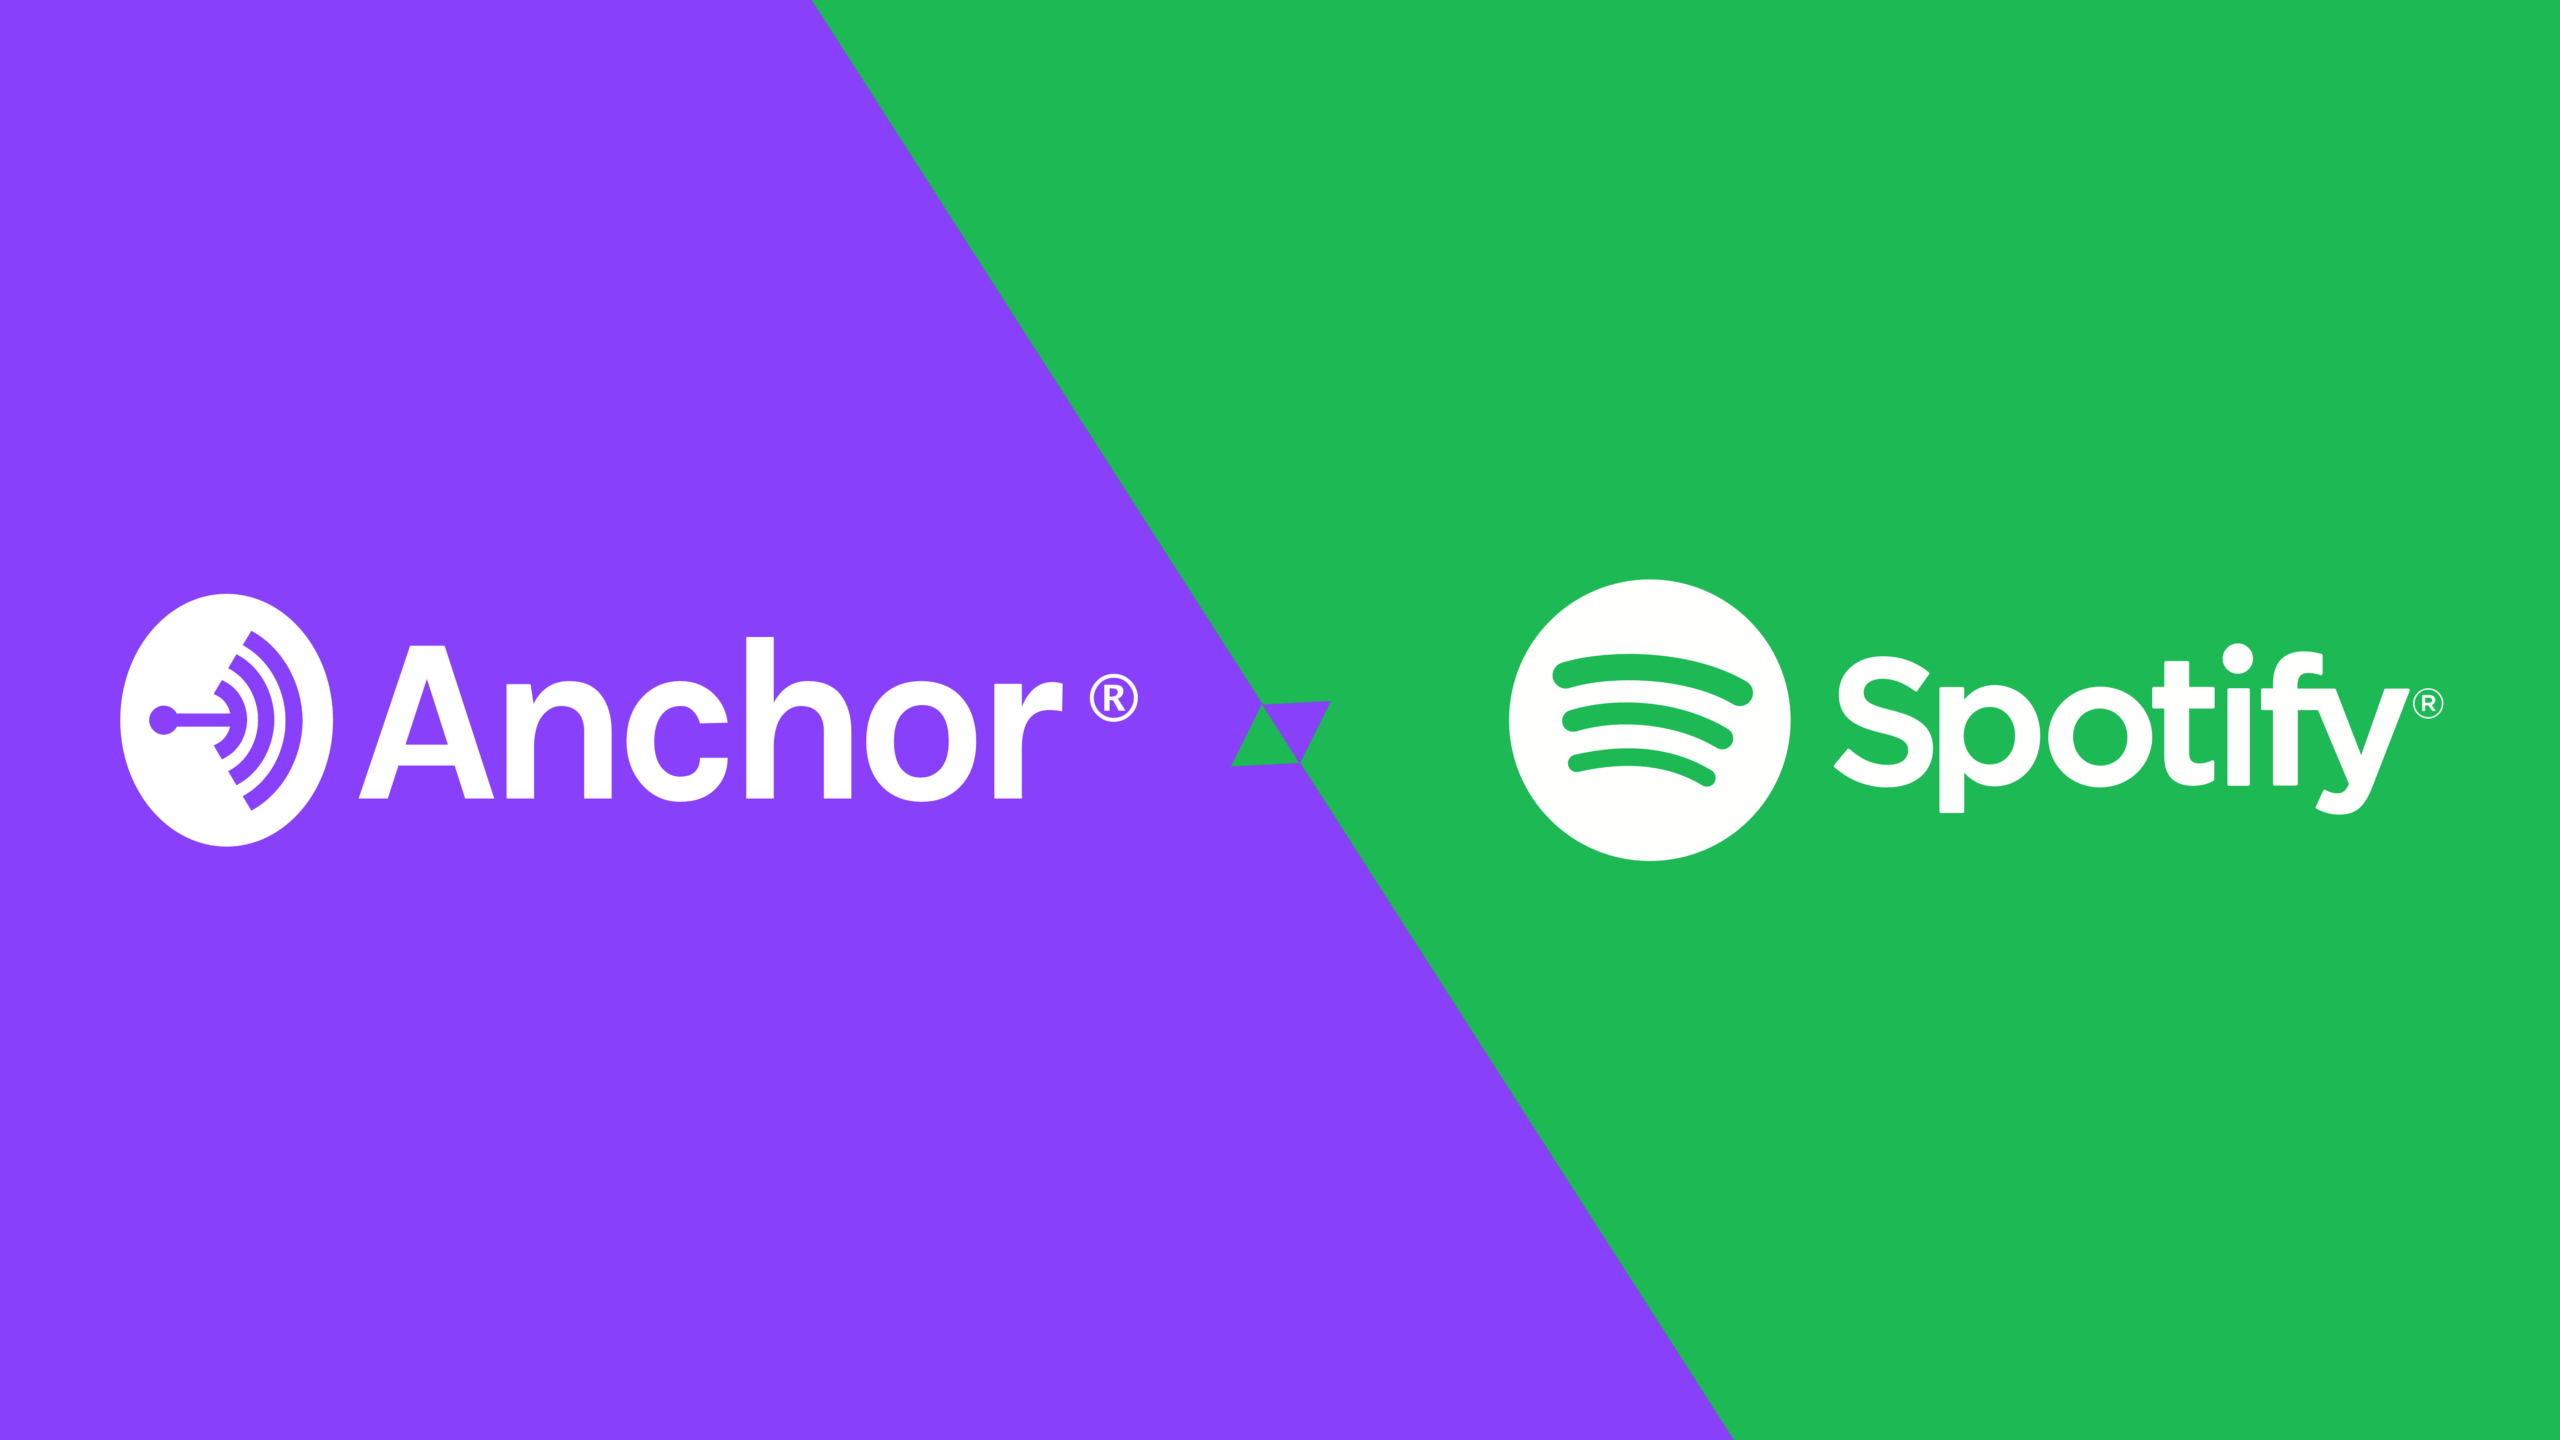 Spotify acquires Gimlet Media and Anchor to expand its reach into podcasts